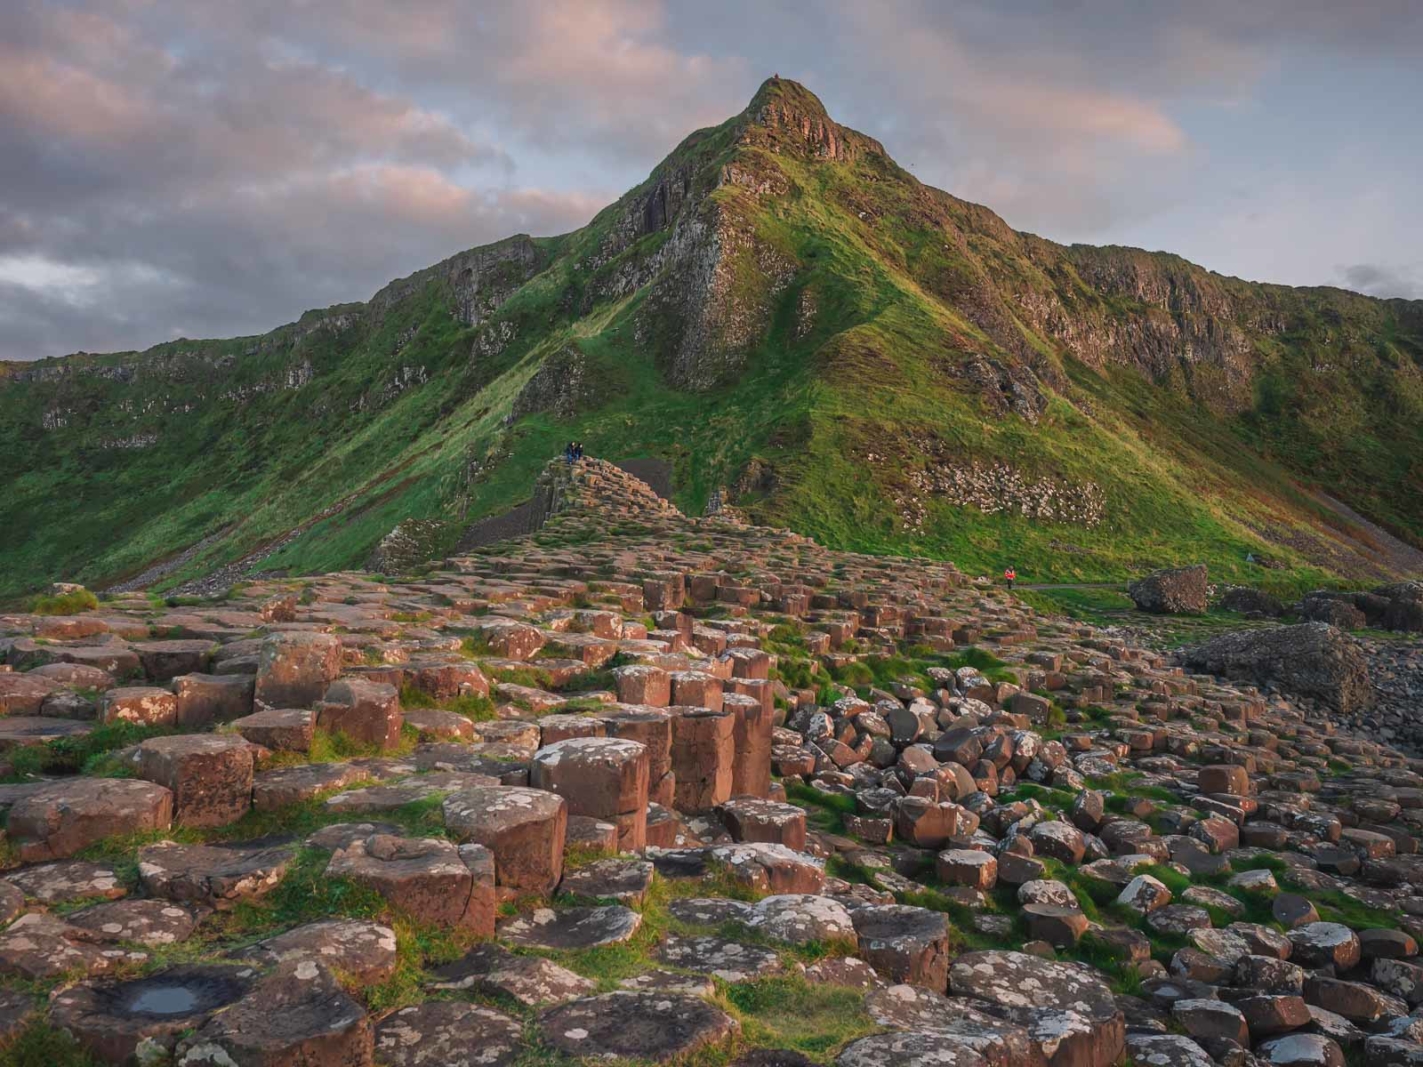 How to visit the Giants Causeway in Northern Ireland